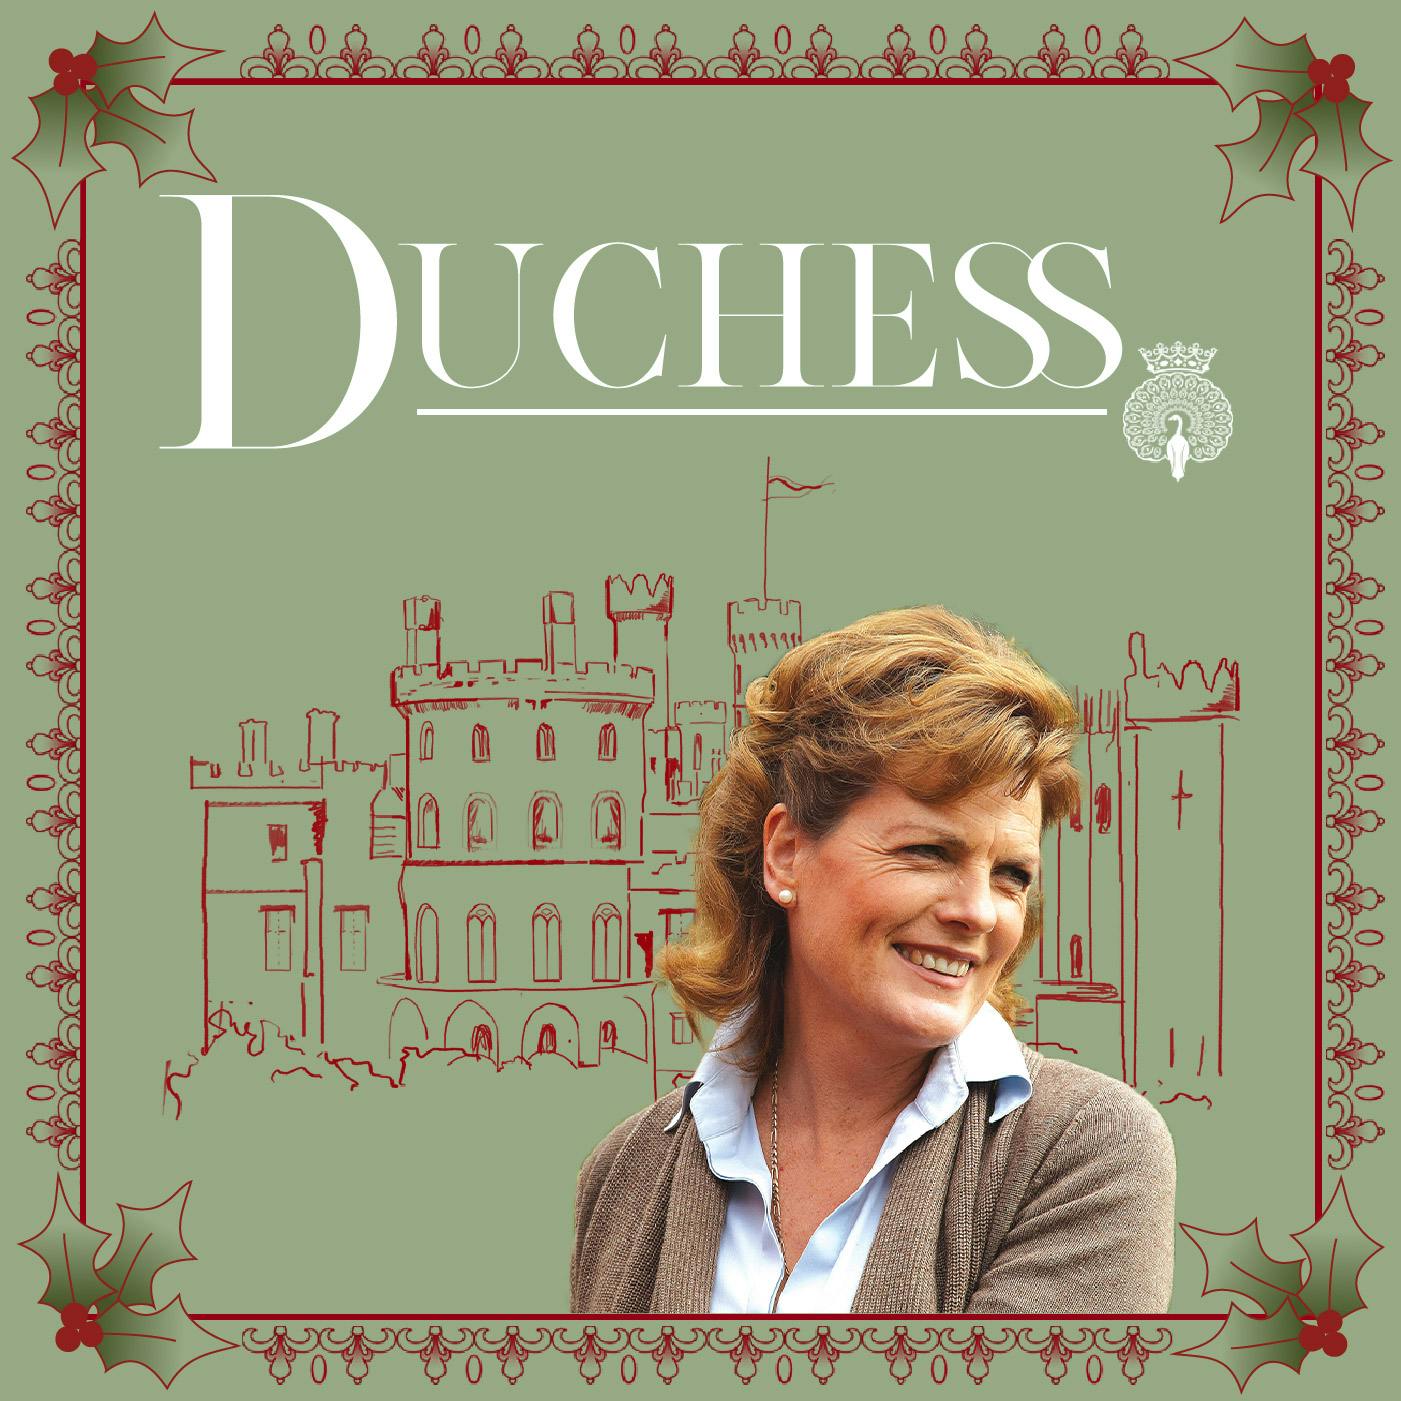 Duchess, A Christmas Special from Belvoir Castle